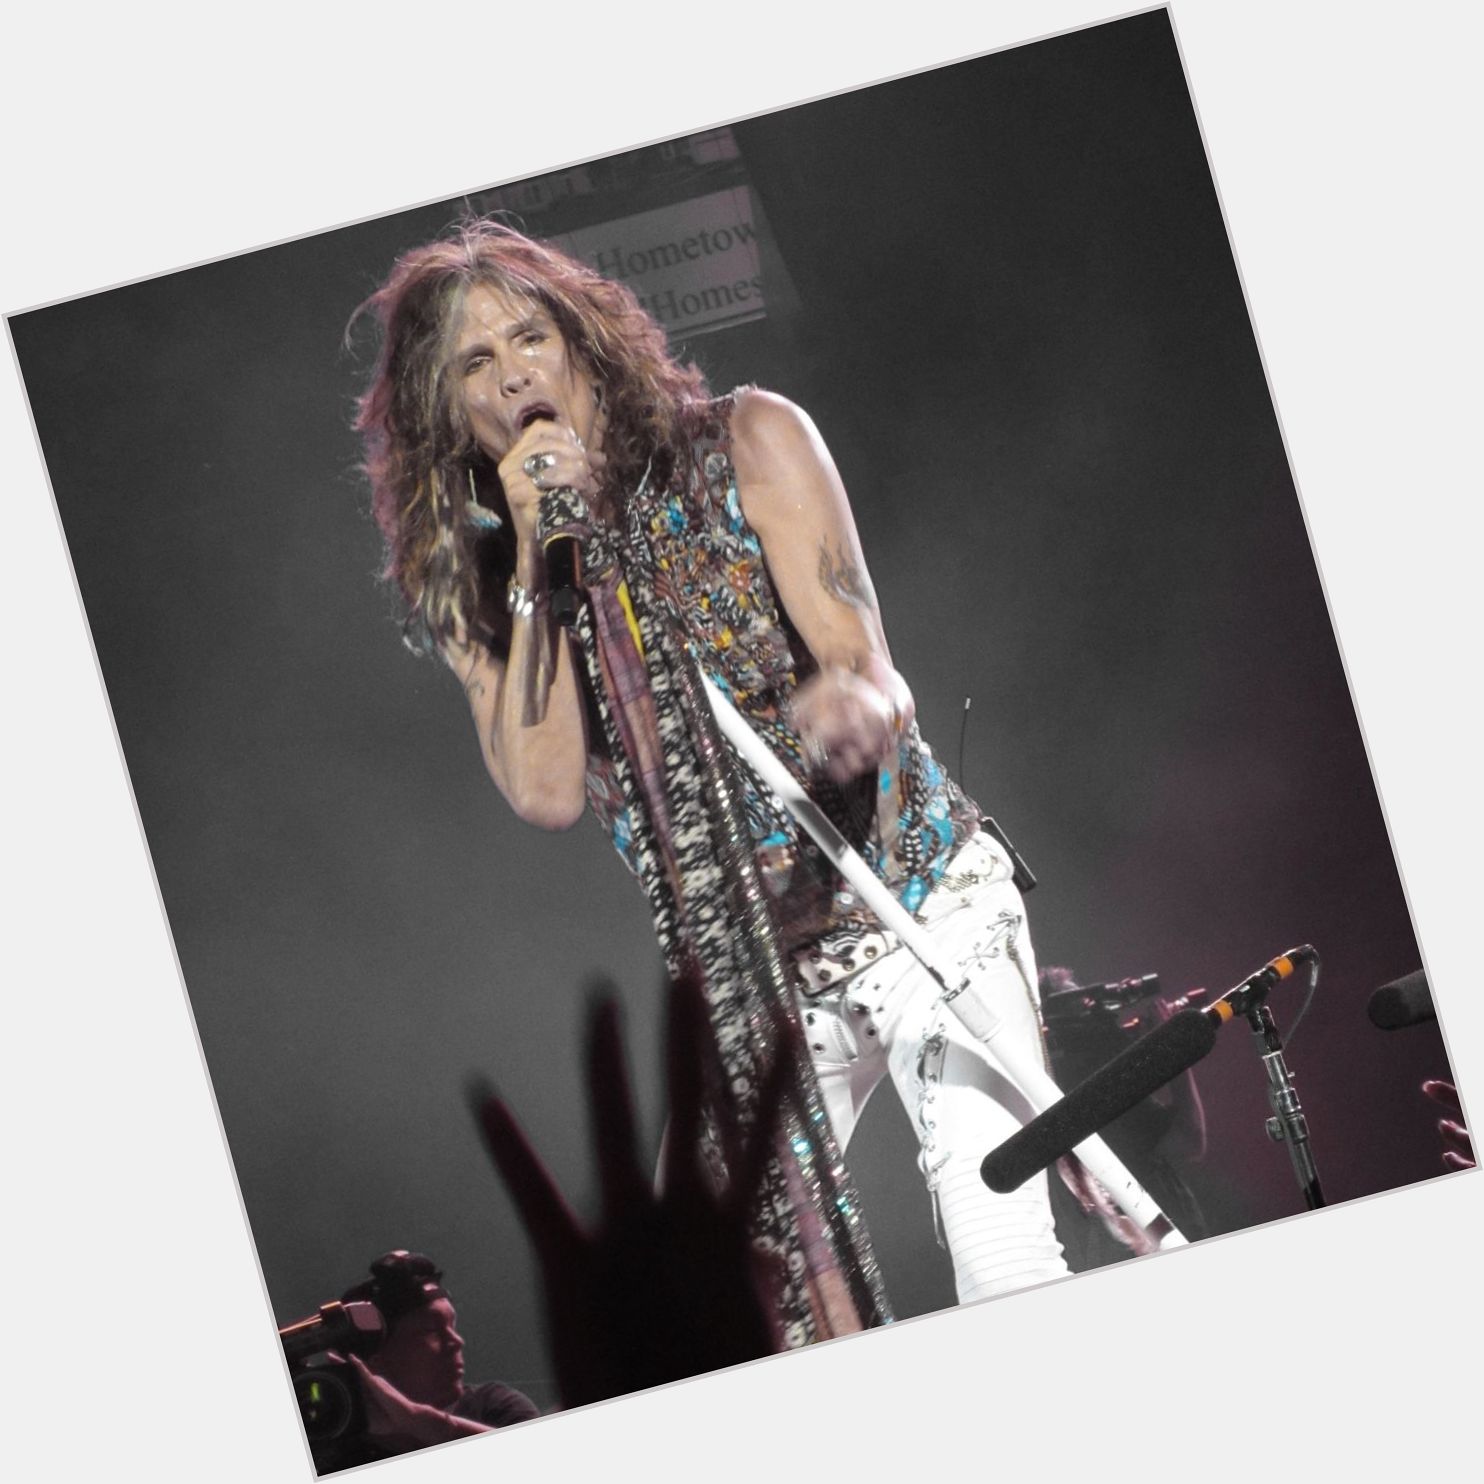 Happy Birthday to Steven Tyler!
What\s your favorite Aerosmith song?  